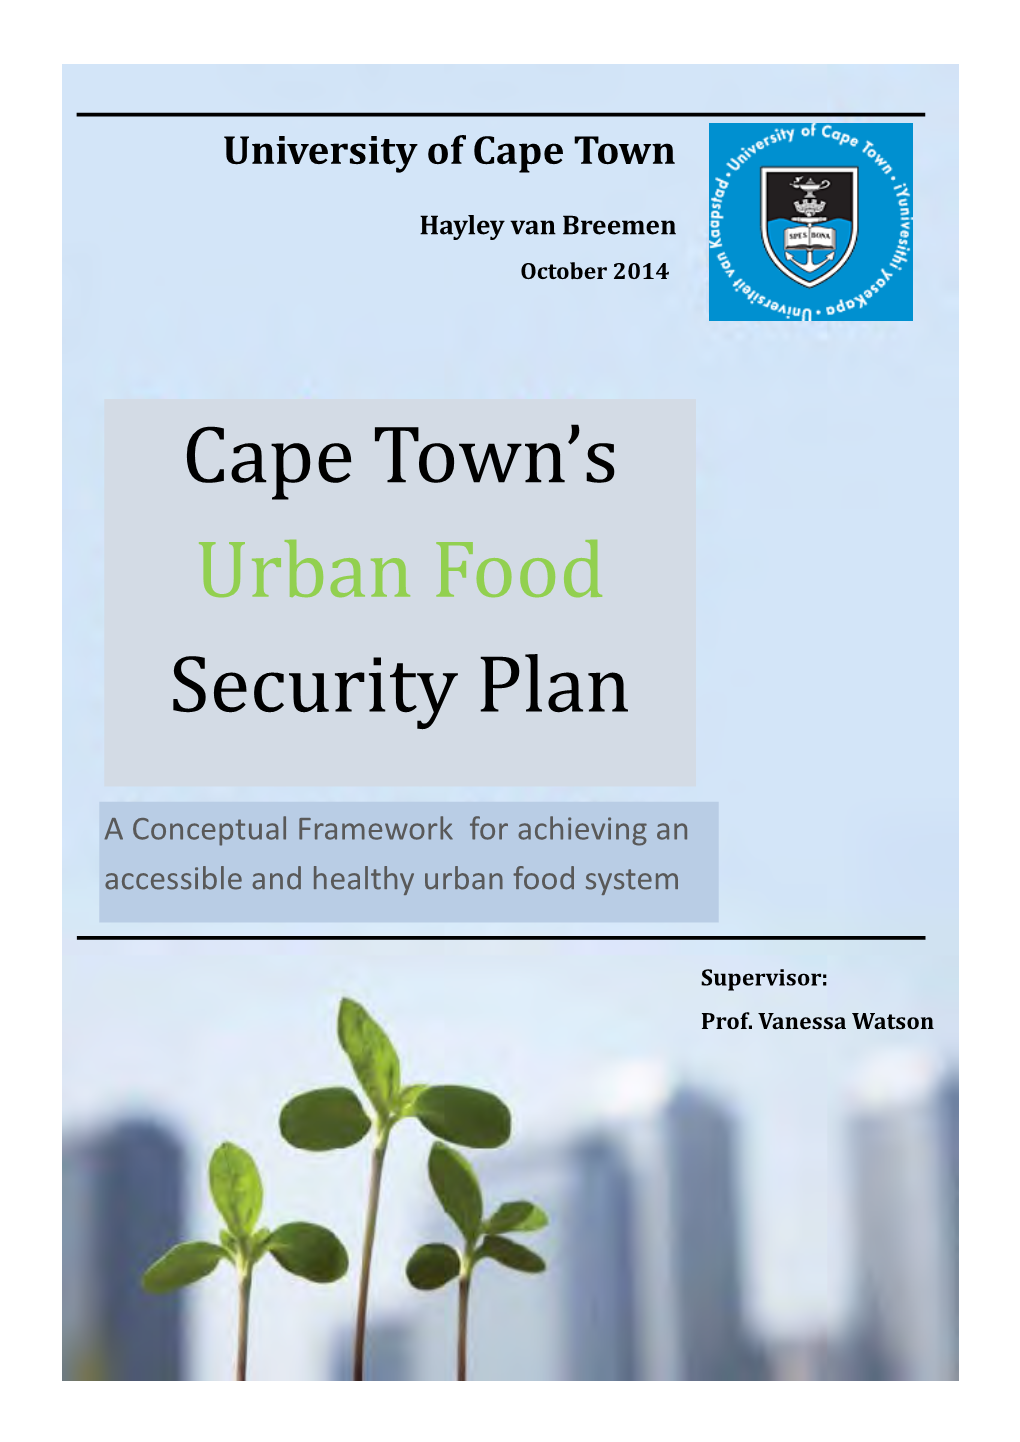 Cape Town's Urban Food Security Plan